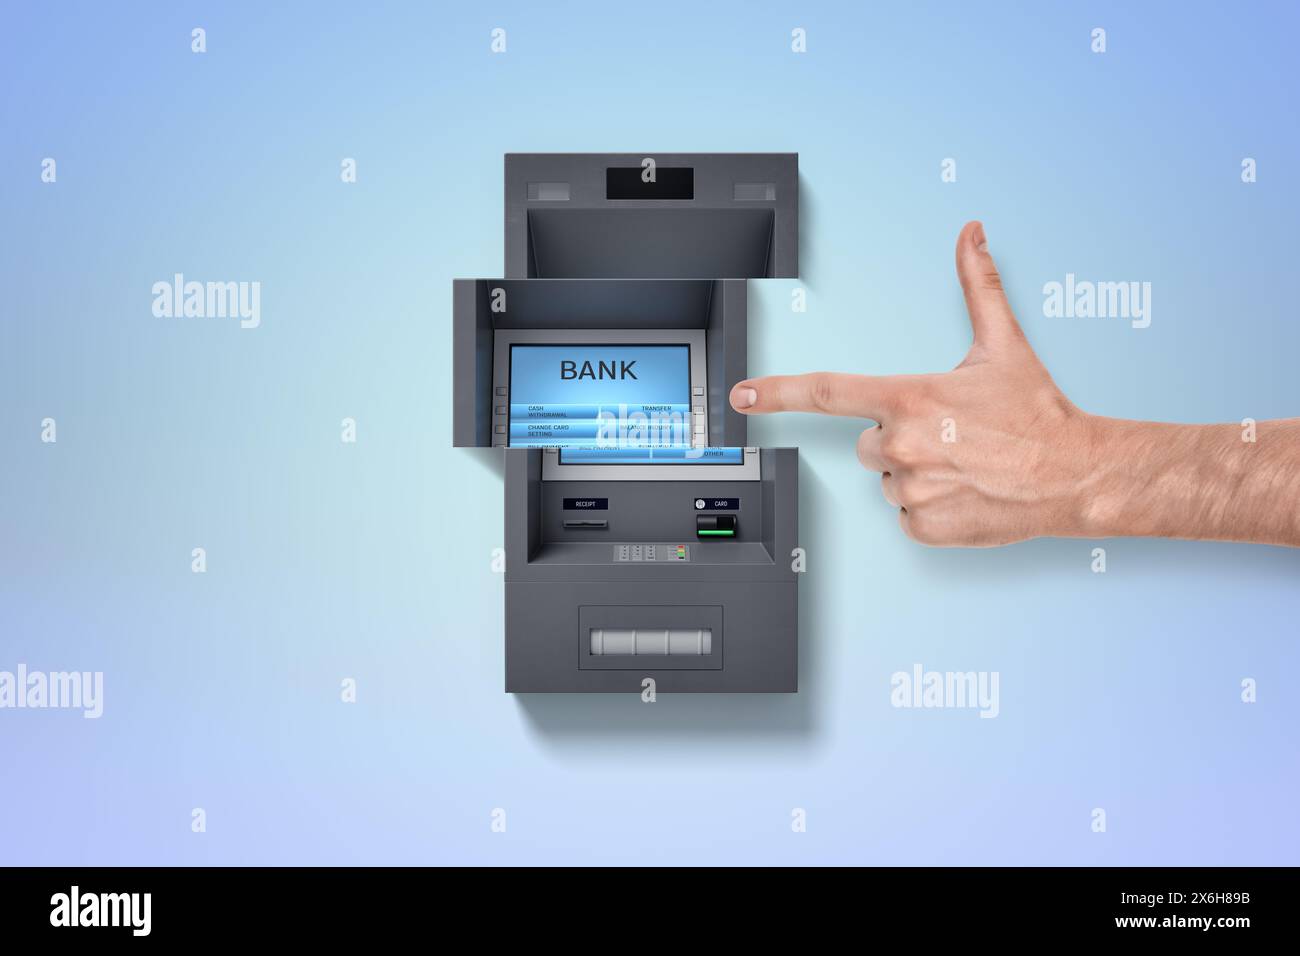 Hand pointing at a 3D ATM illustration Stock Photo